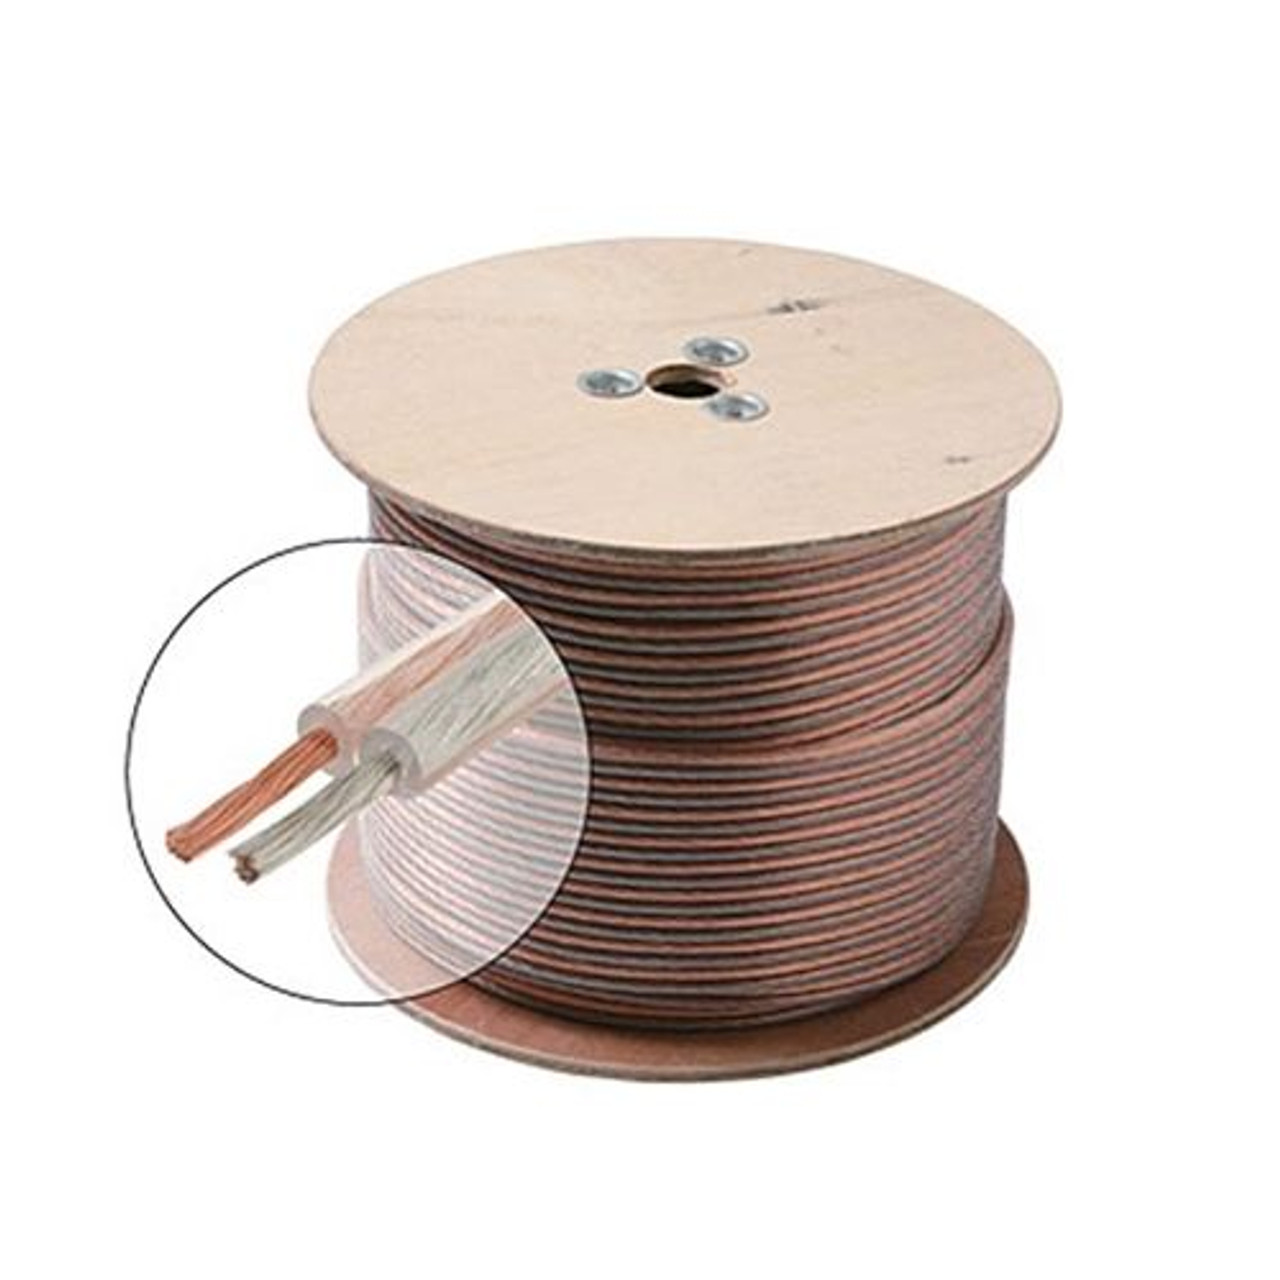 Steren 255-414 500' FT 14 Gauge Clear Jacket Speaker Cable Wire 2 Conductor Zip 100% Copper Pro Grade Pure Copper Speaker Cable HI-FI Digital Audio Home Theater, Cable Spool, Part # 255414-500